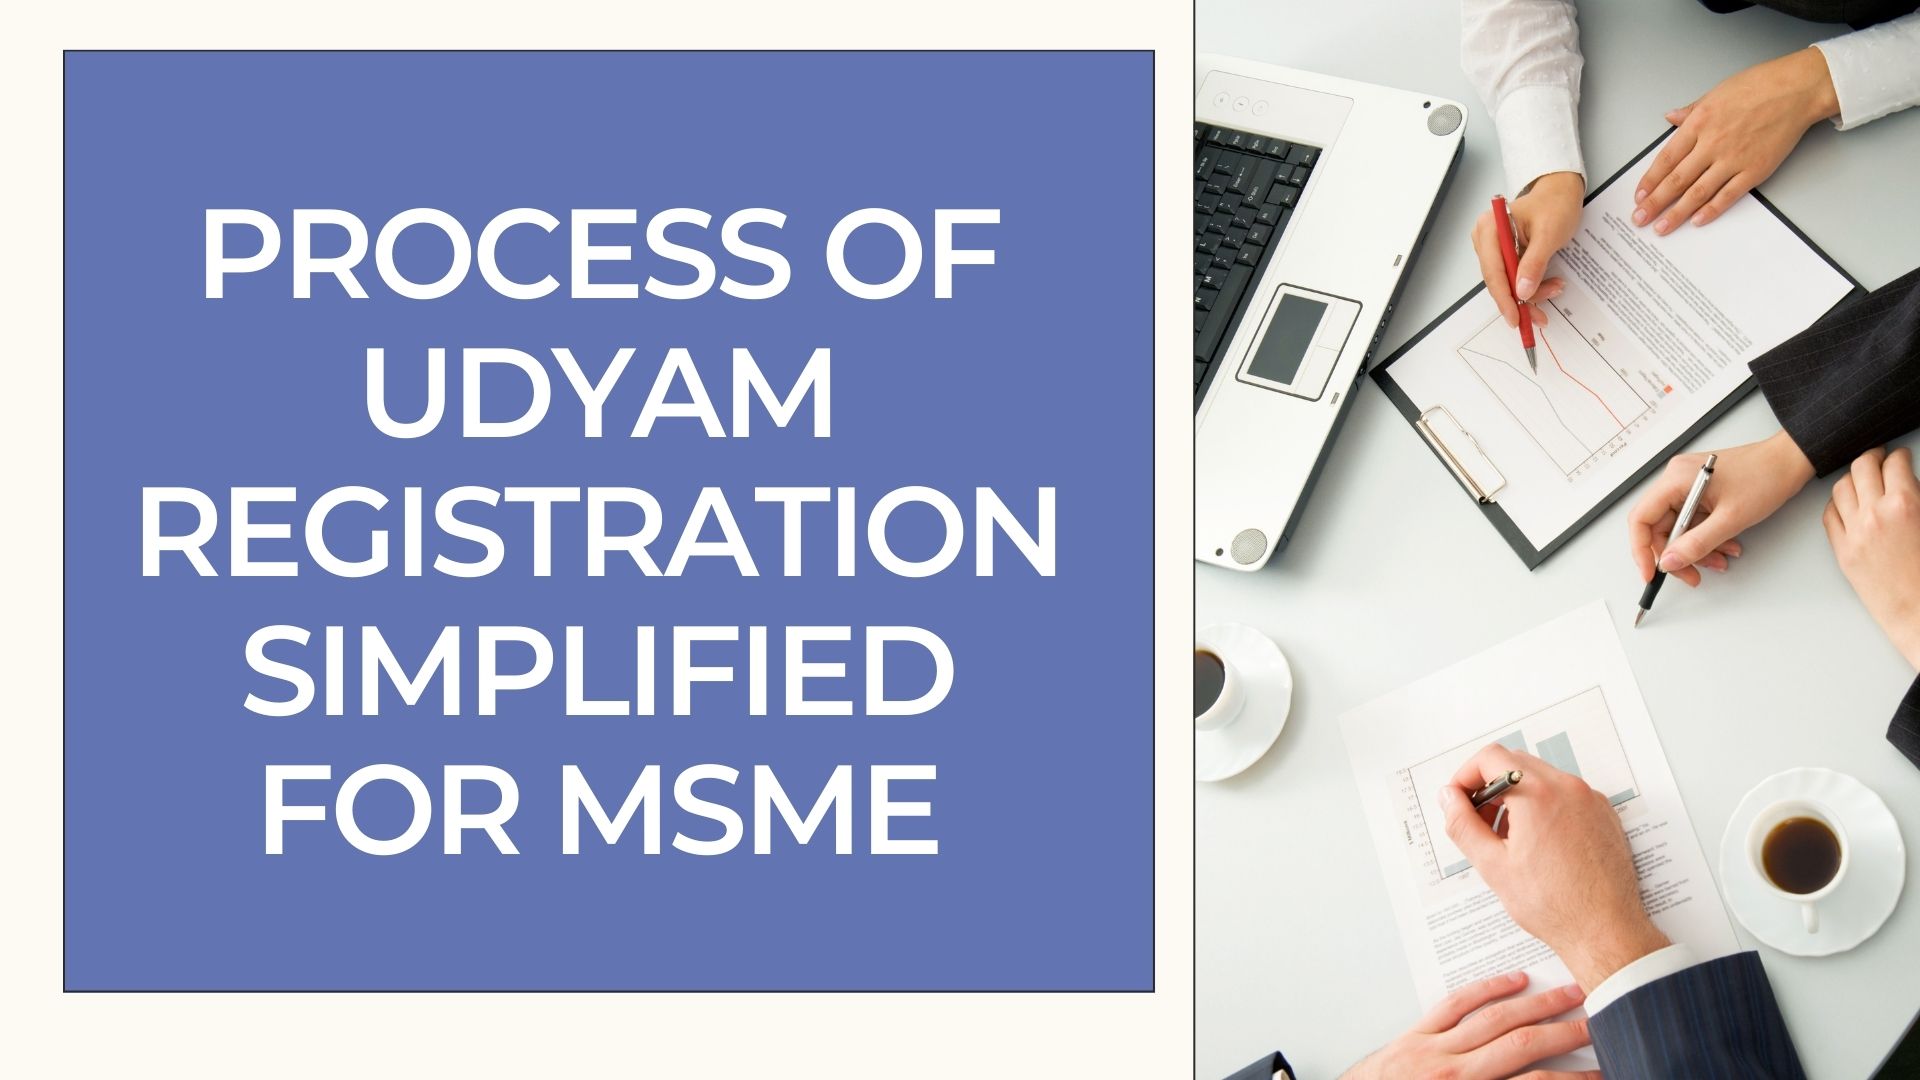 Process of Udyam Registration Simplified for MSME